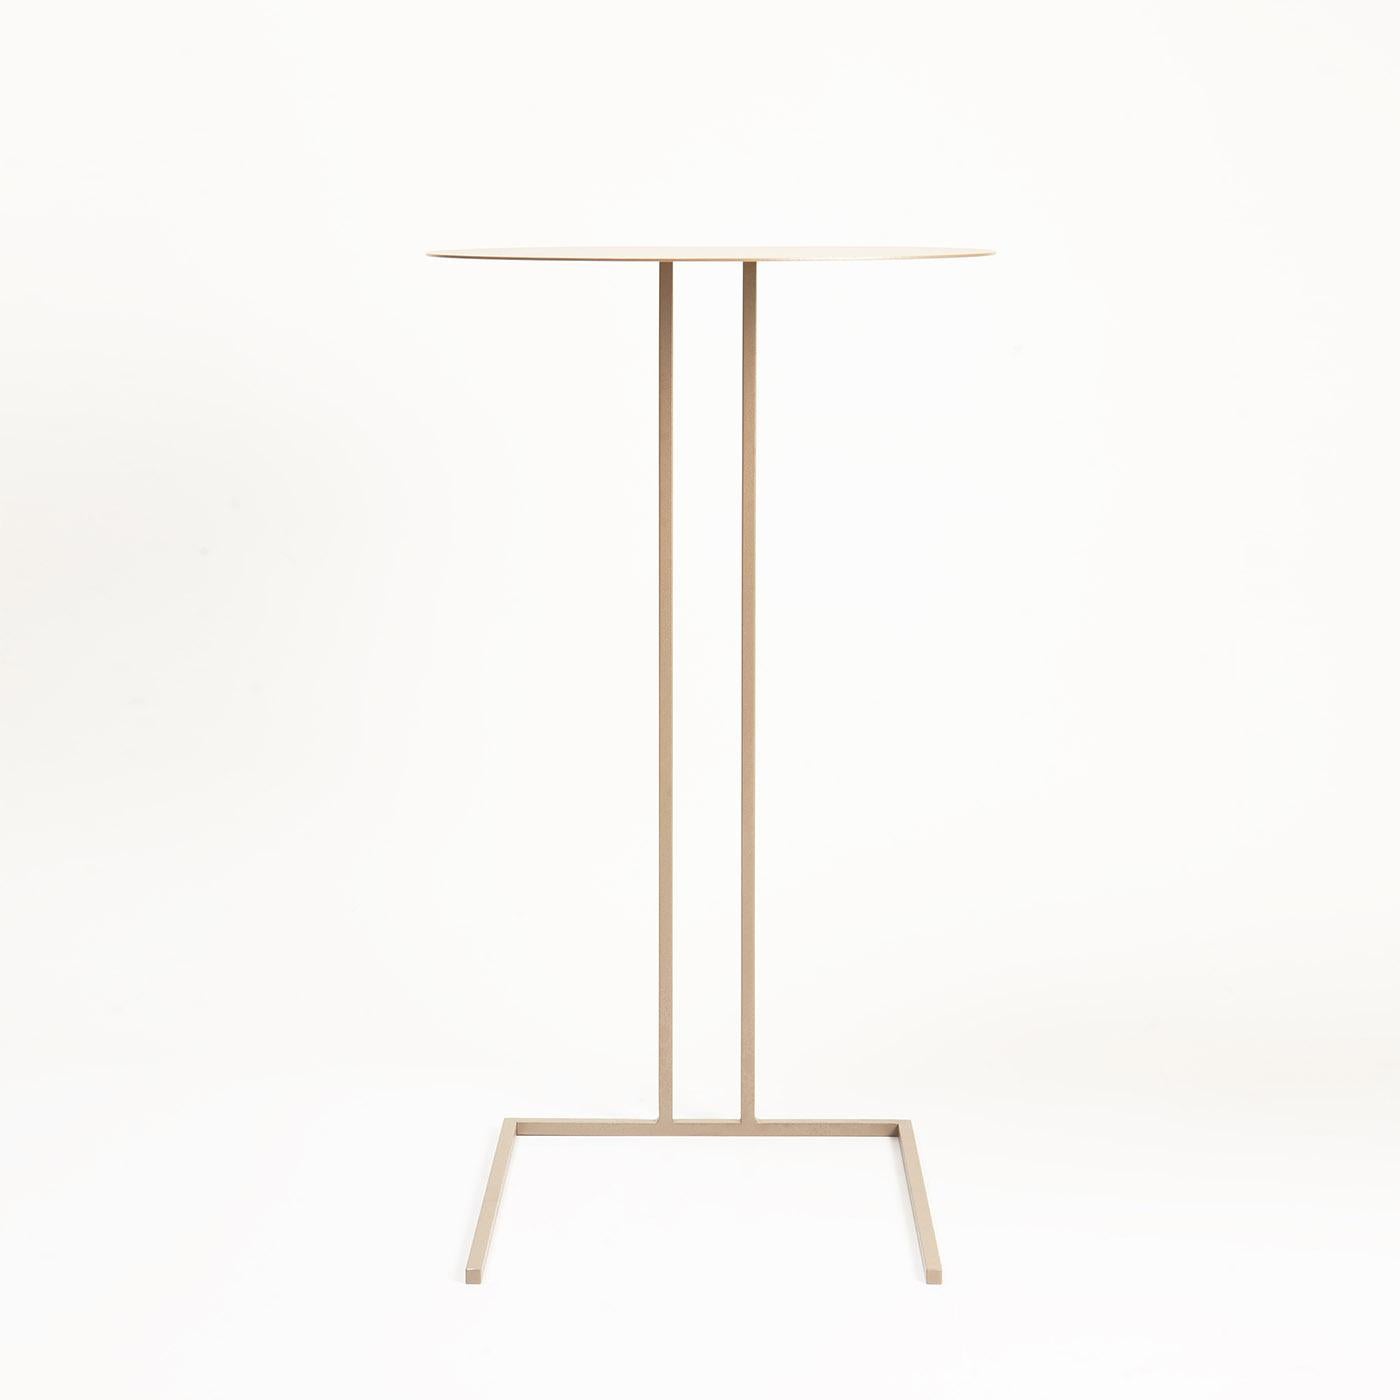 Distinguished by its functional character, this side table features clean and elegant lines of simple and timeless allure. Handmade of champagne gold-lacquered iron, enhanced with a subtle metallic finish, it will make for an ideal complement to a